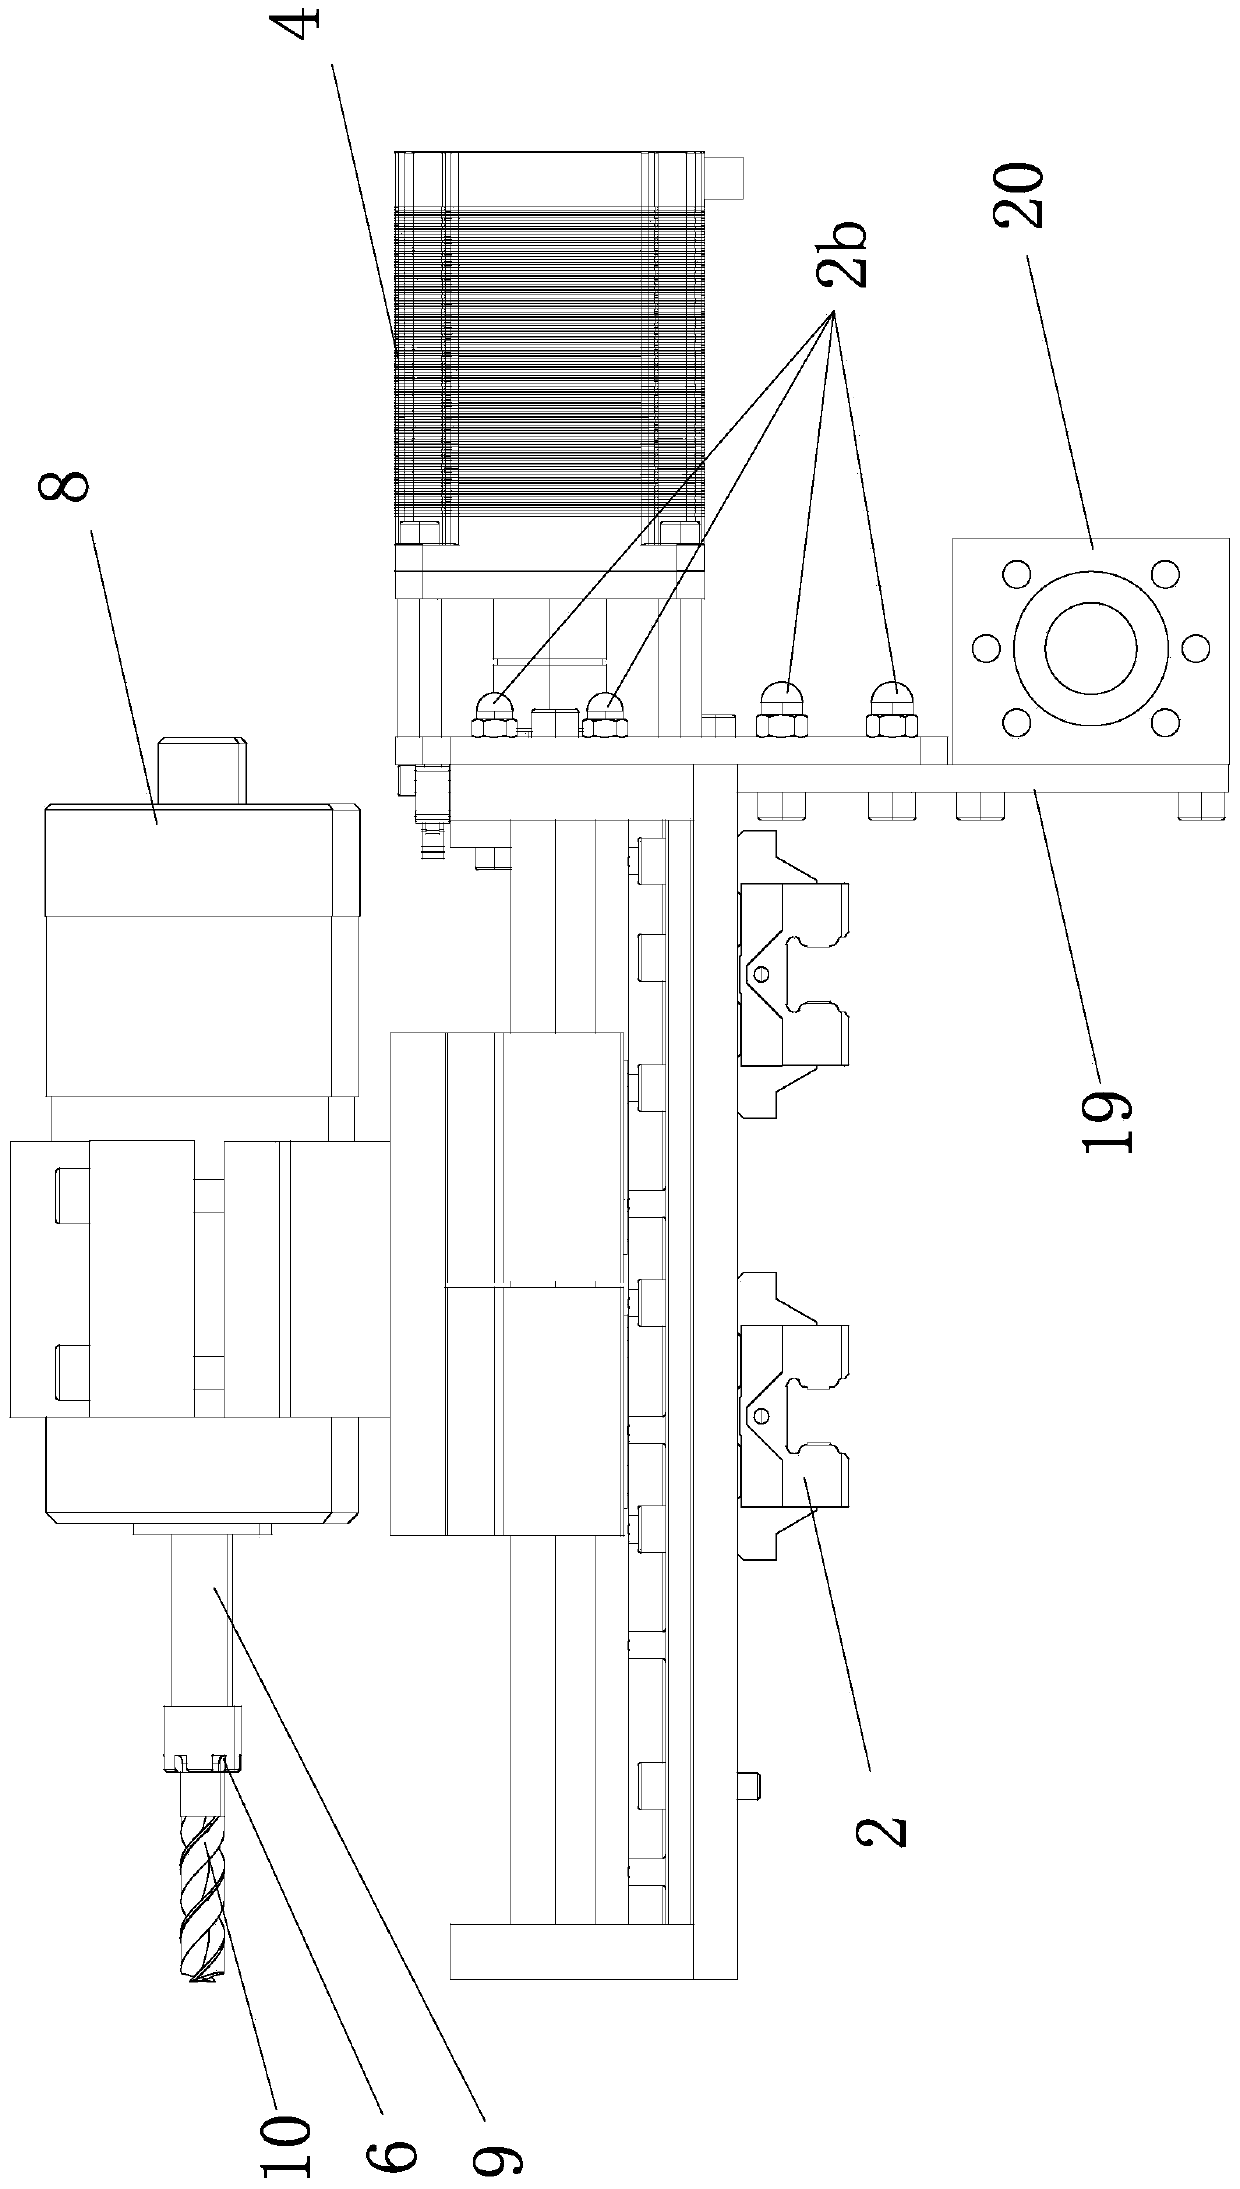 Detachable type Z-direction cutter assembly on machine tool